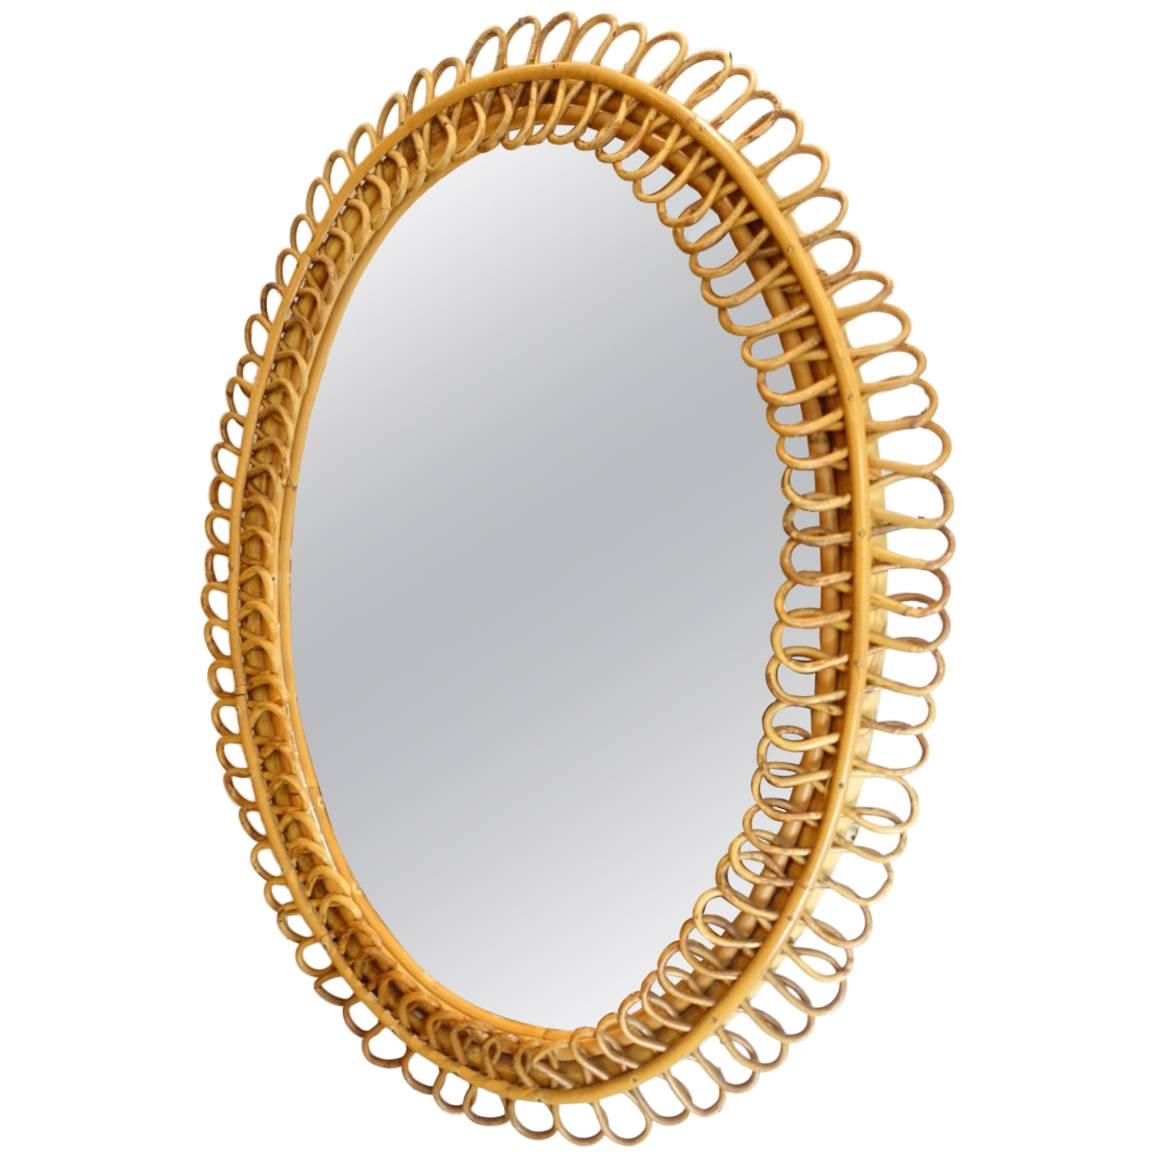 French Midcentury Oval Rattan Wicker Mirror